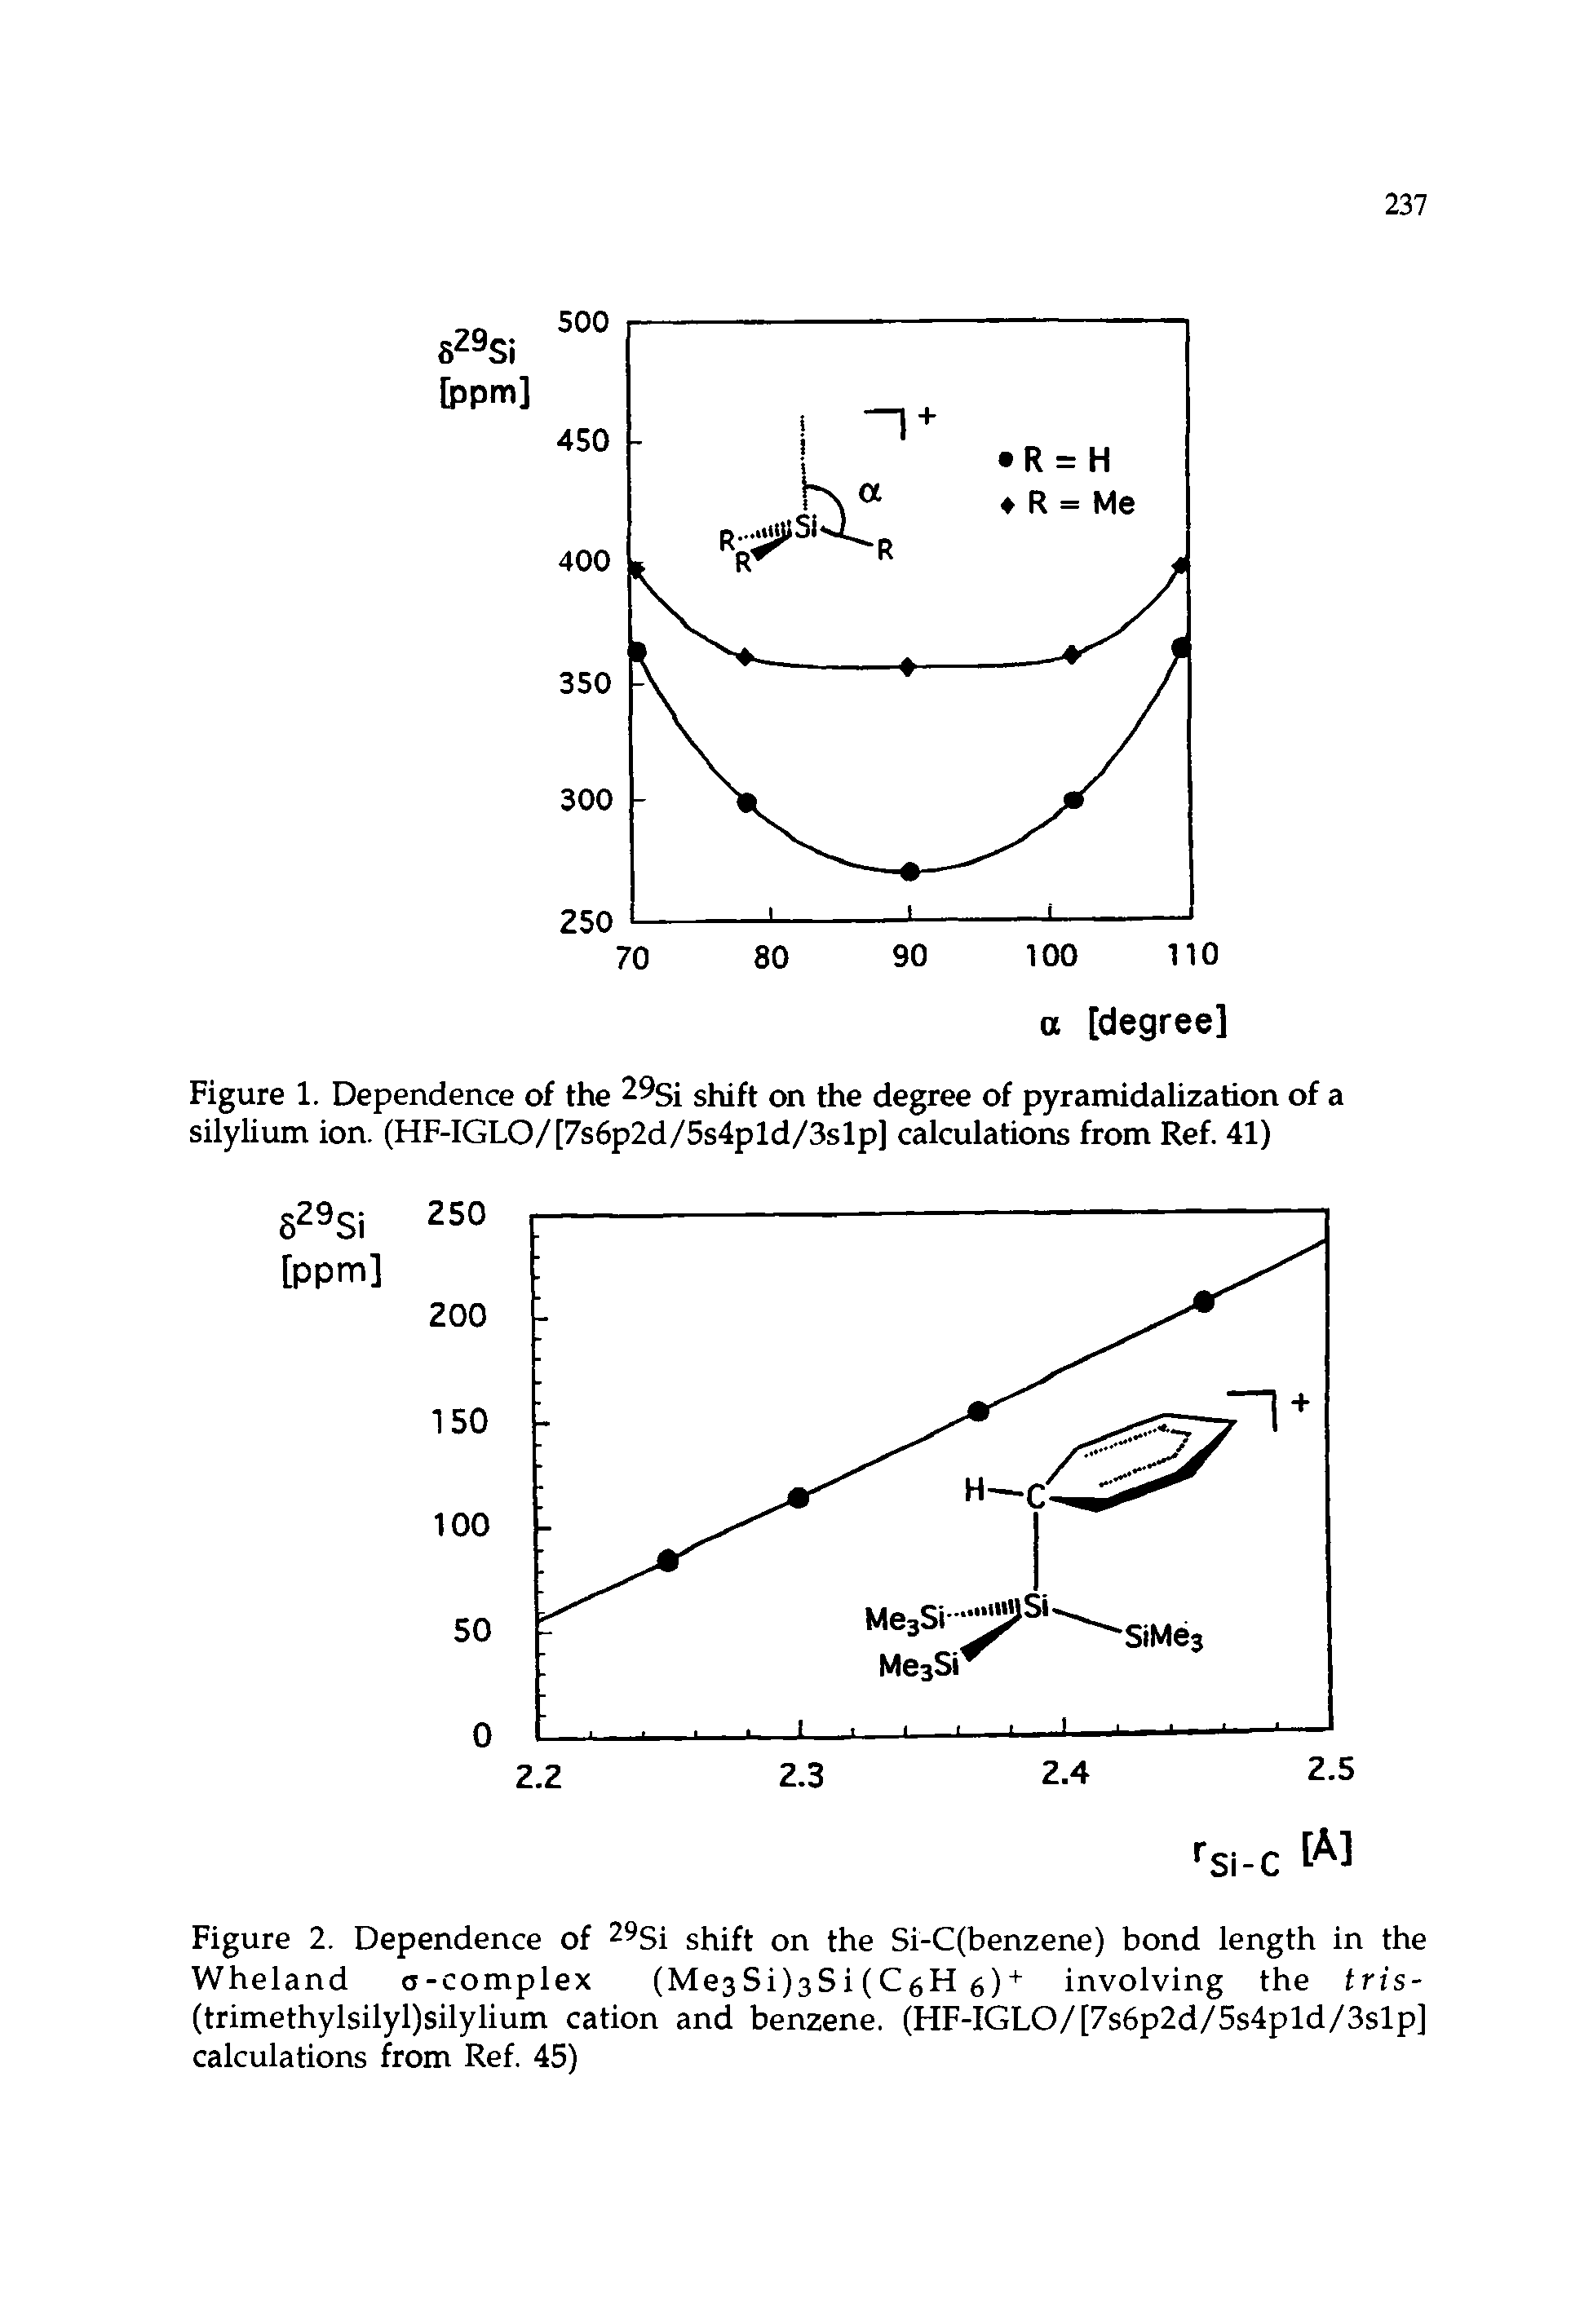 Figure 2. Dependence of 9Si shift on the Si-C(benzene) bond length in the Wheland c-complex (Me3Si)3Si (CgH (,)+ involving the tris-(trimethylsilyl)silylium cation and benzene. (HF-IGLO/[7s6p2d/5s4pld/3slp] calculations from Ref. 45)...